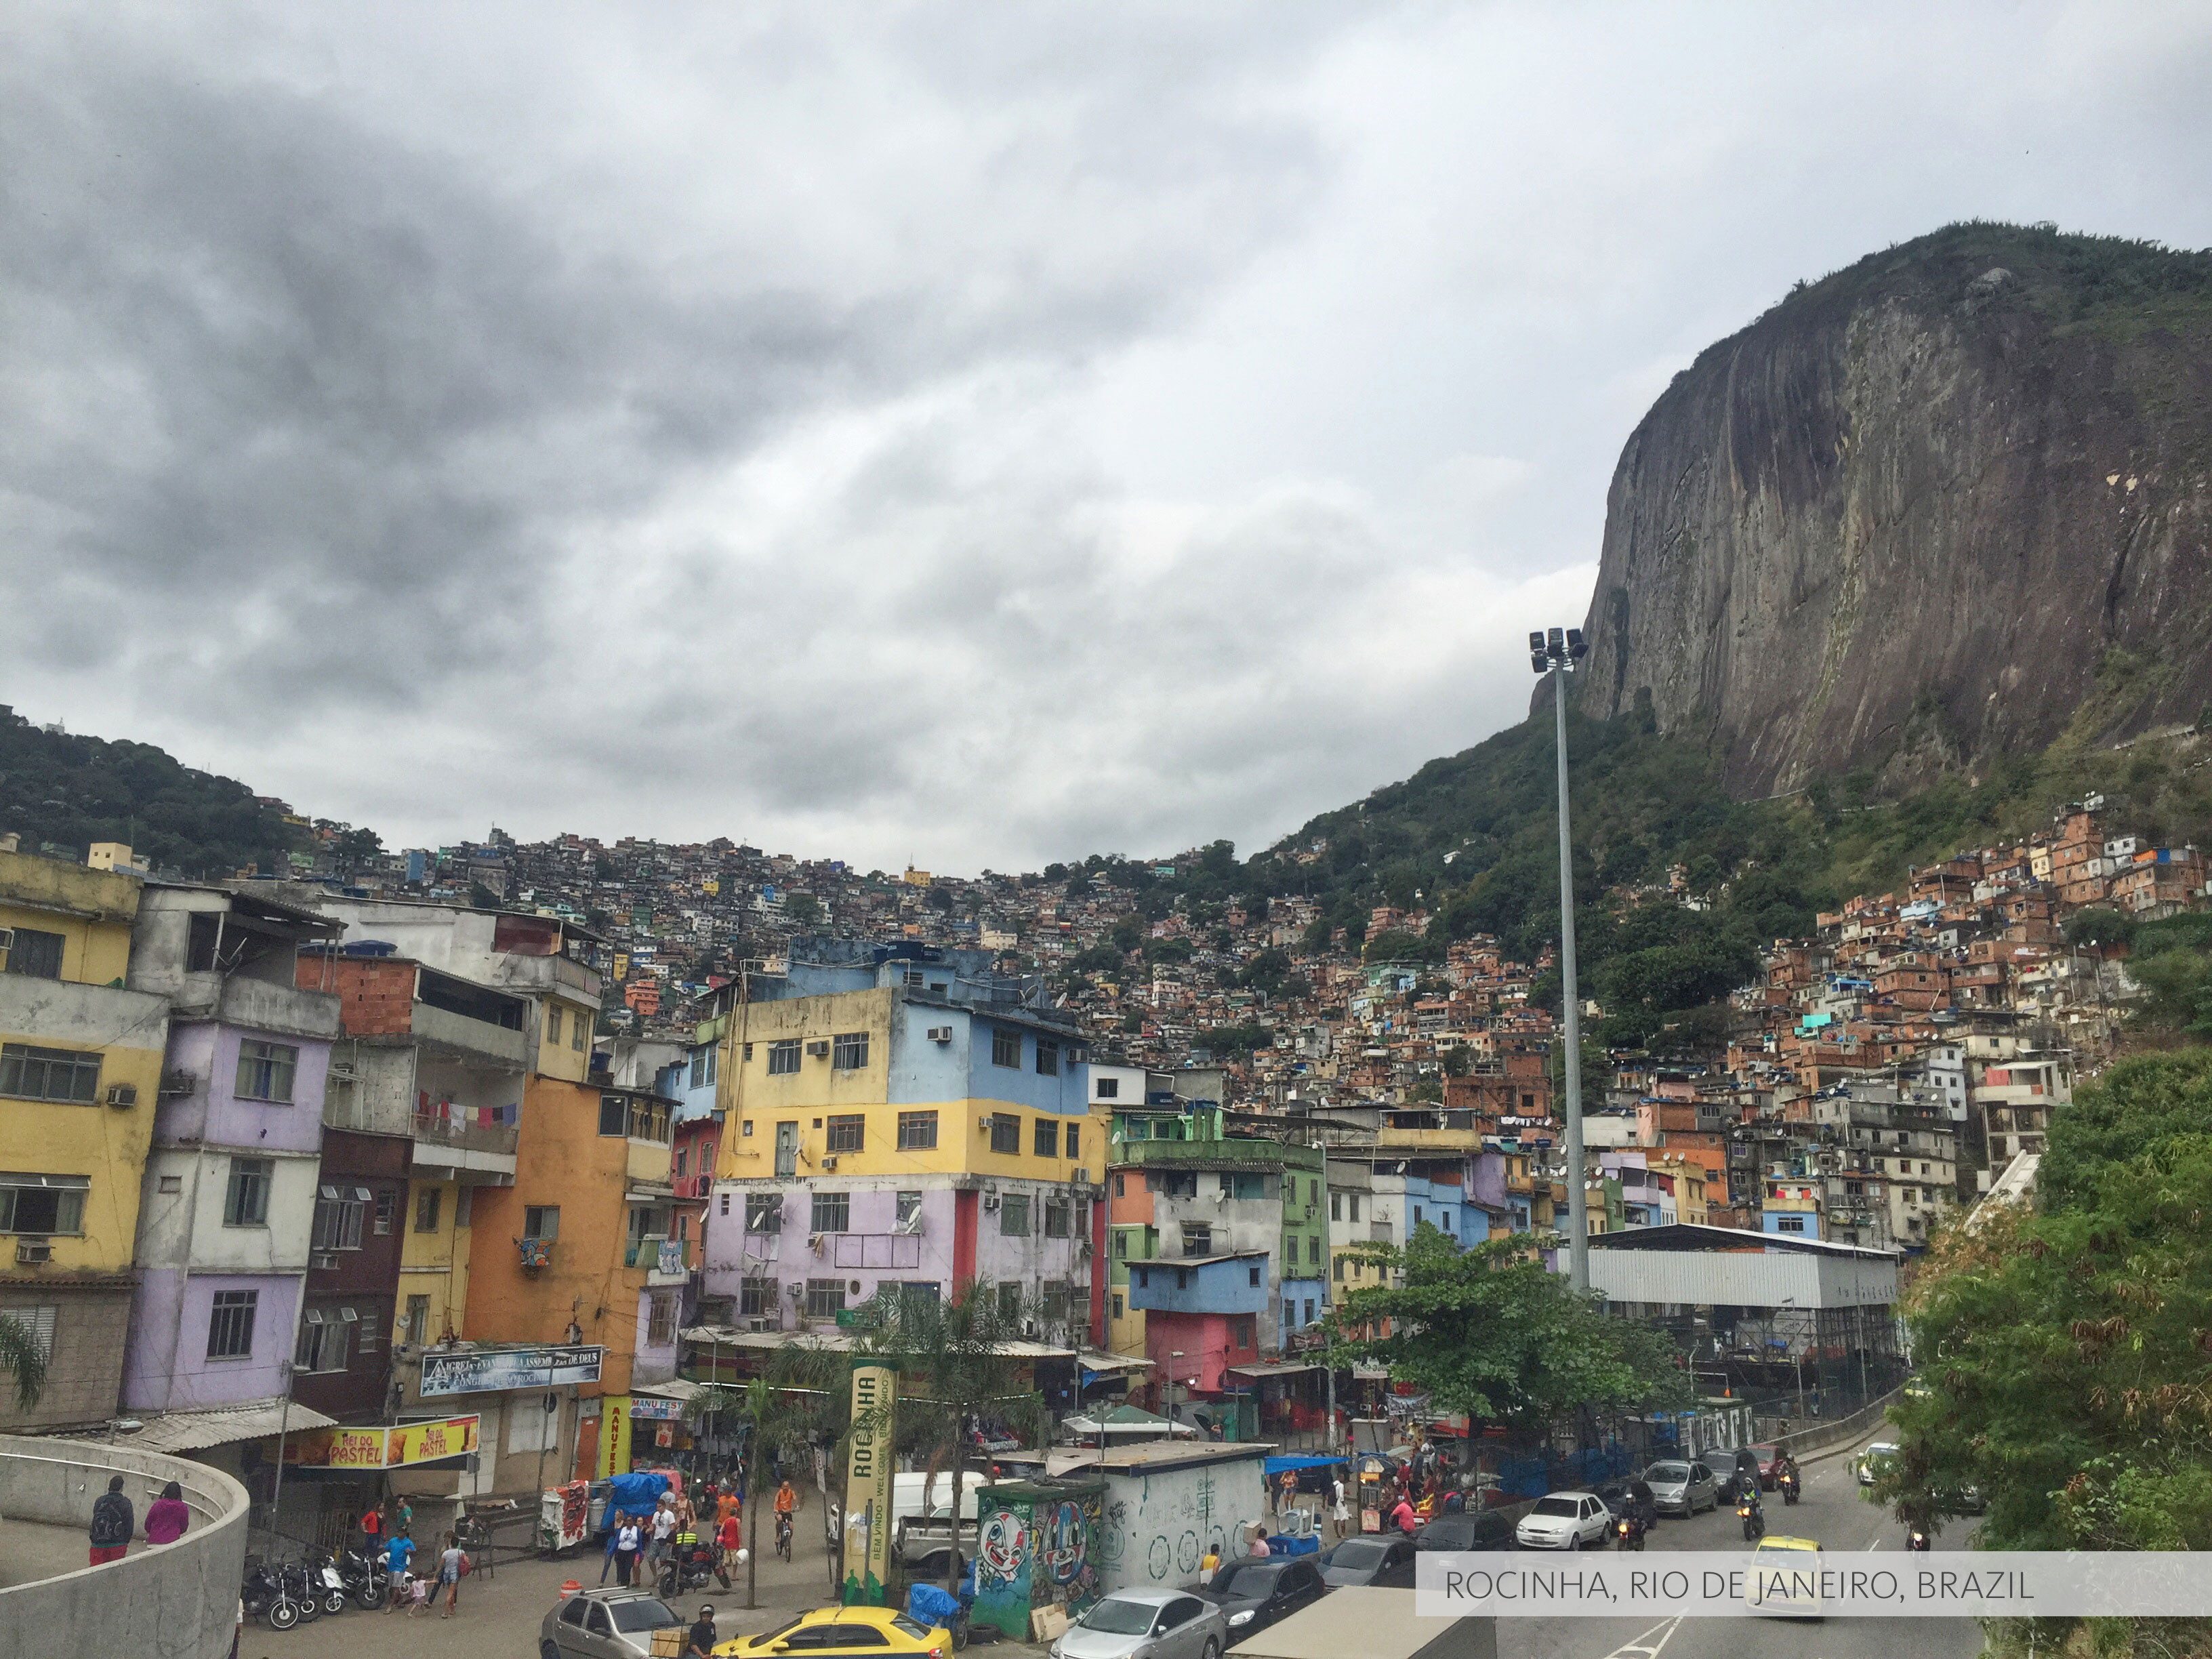 Brazil study abroad - photo story by Daniel Connell